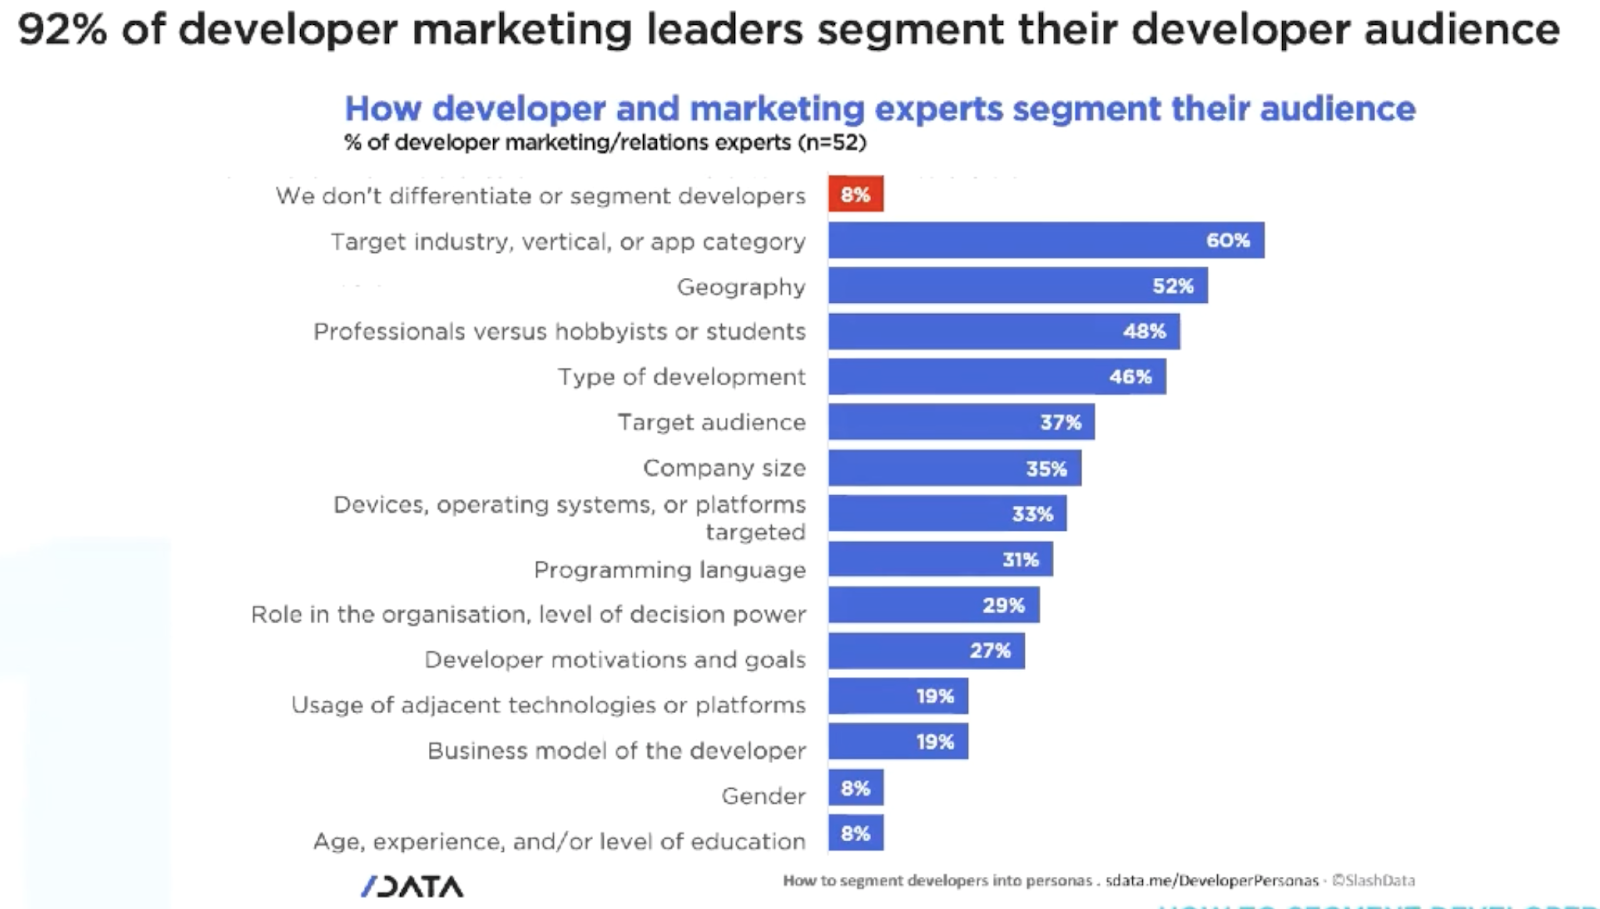 graph showing that most developer marketing leaders segment their developer audience